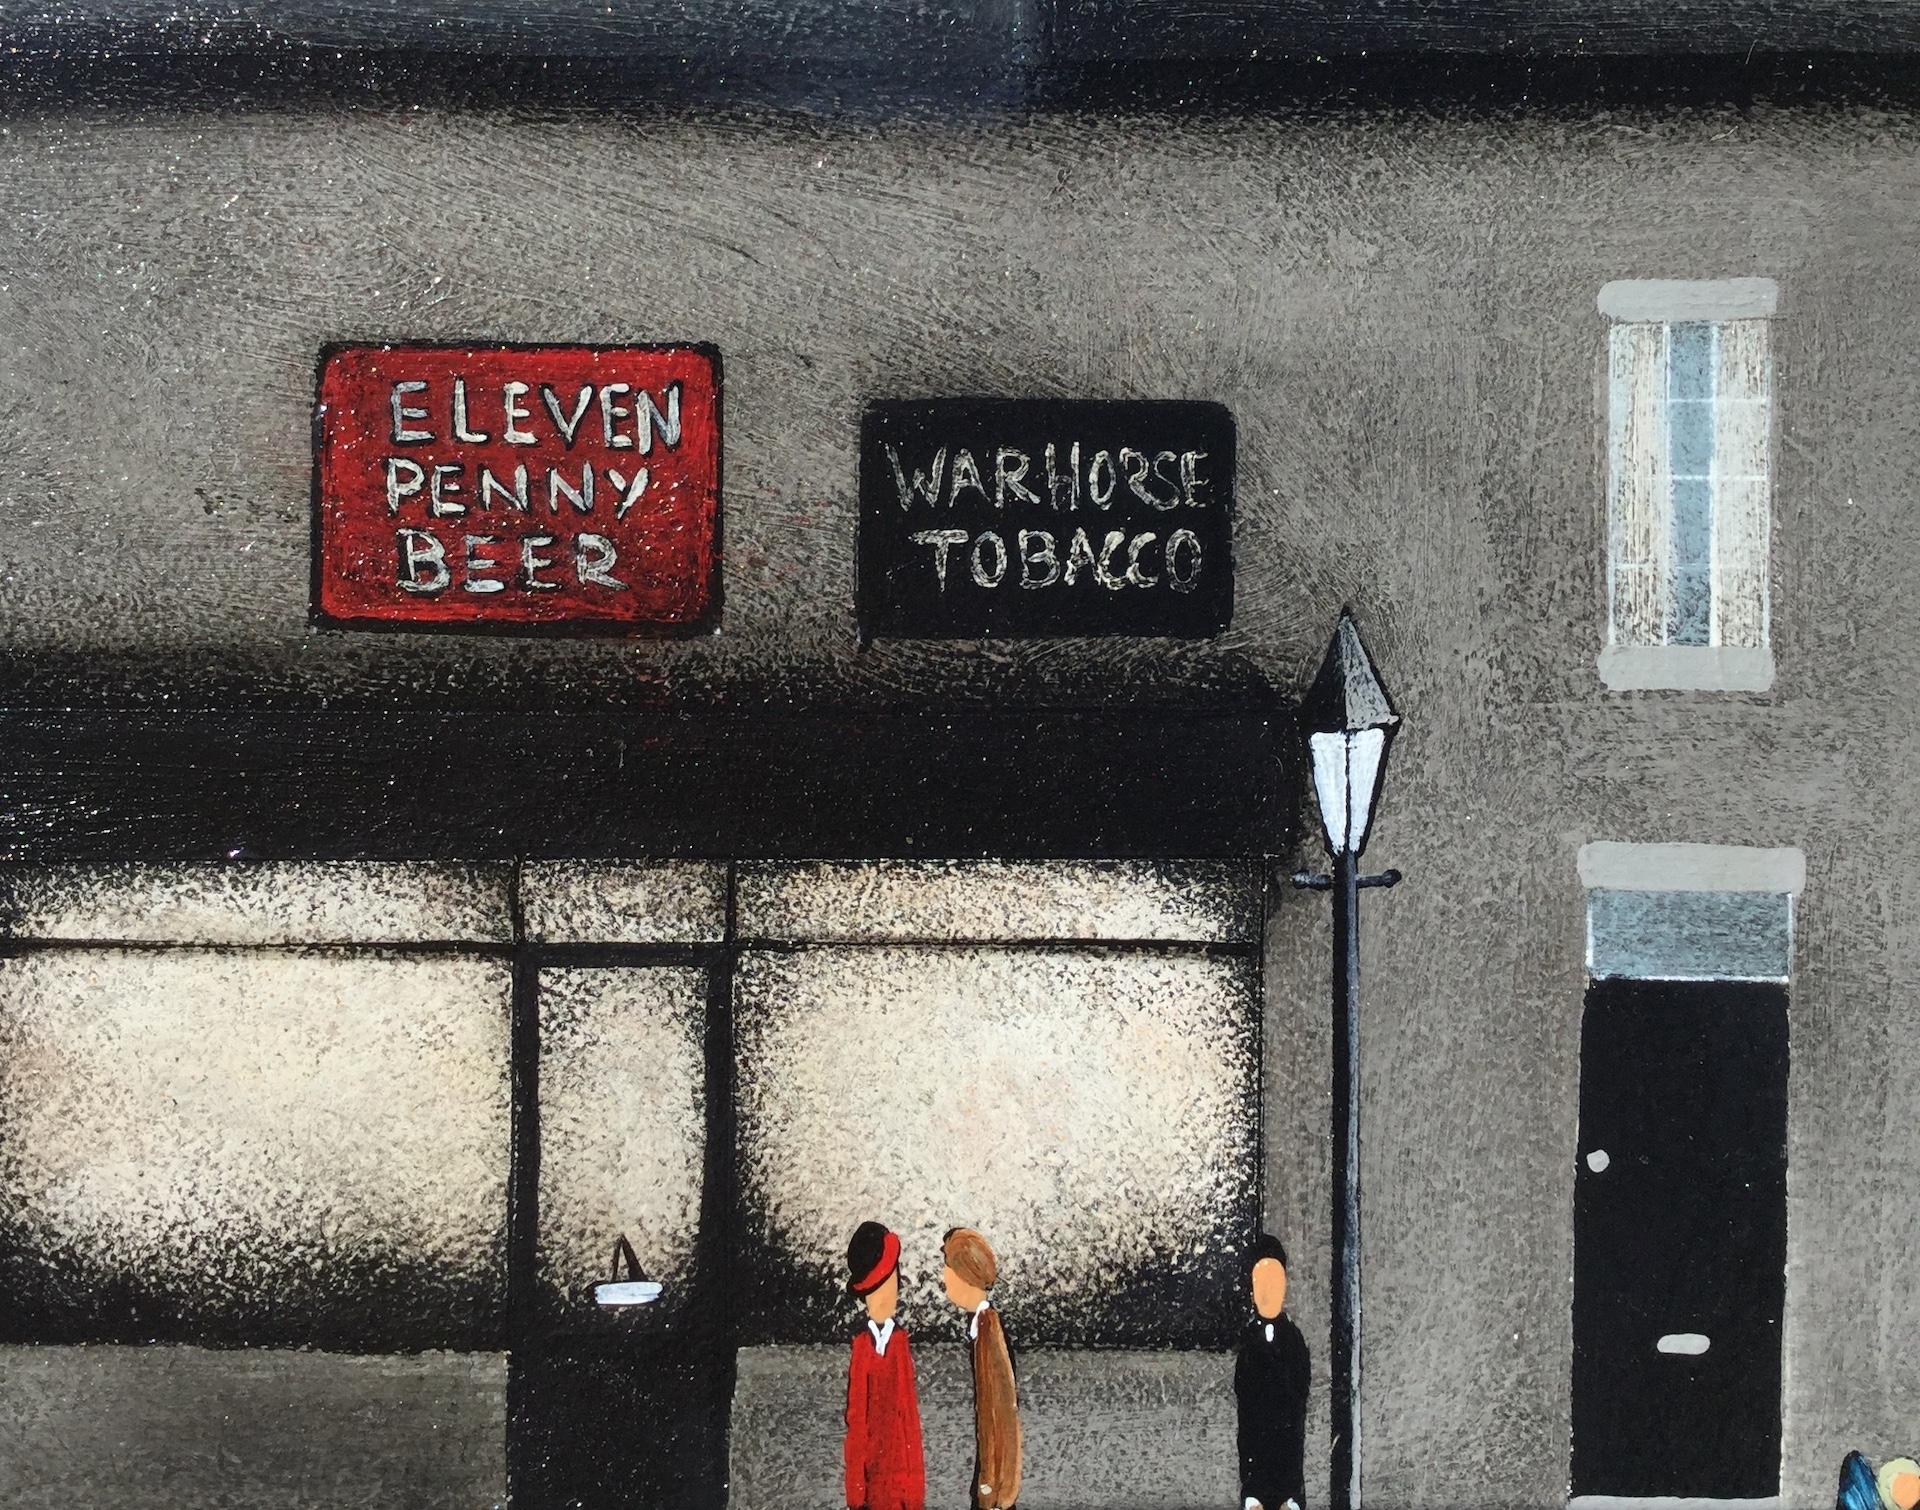 Sean Durkin, Bustling High Street, Contemporary Lowry -esque Figurative Painting 1